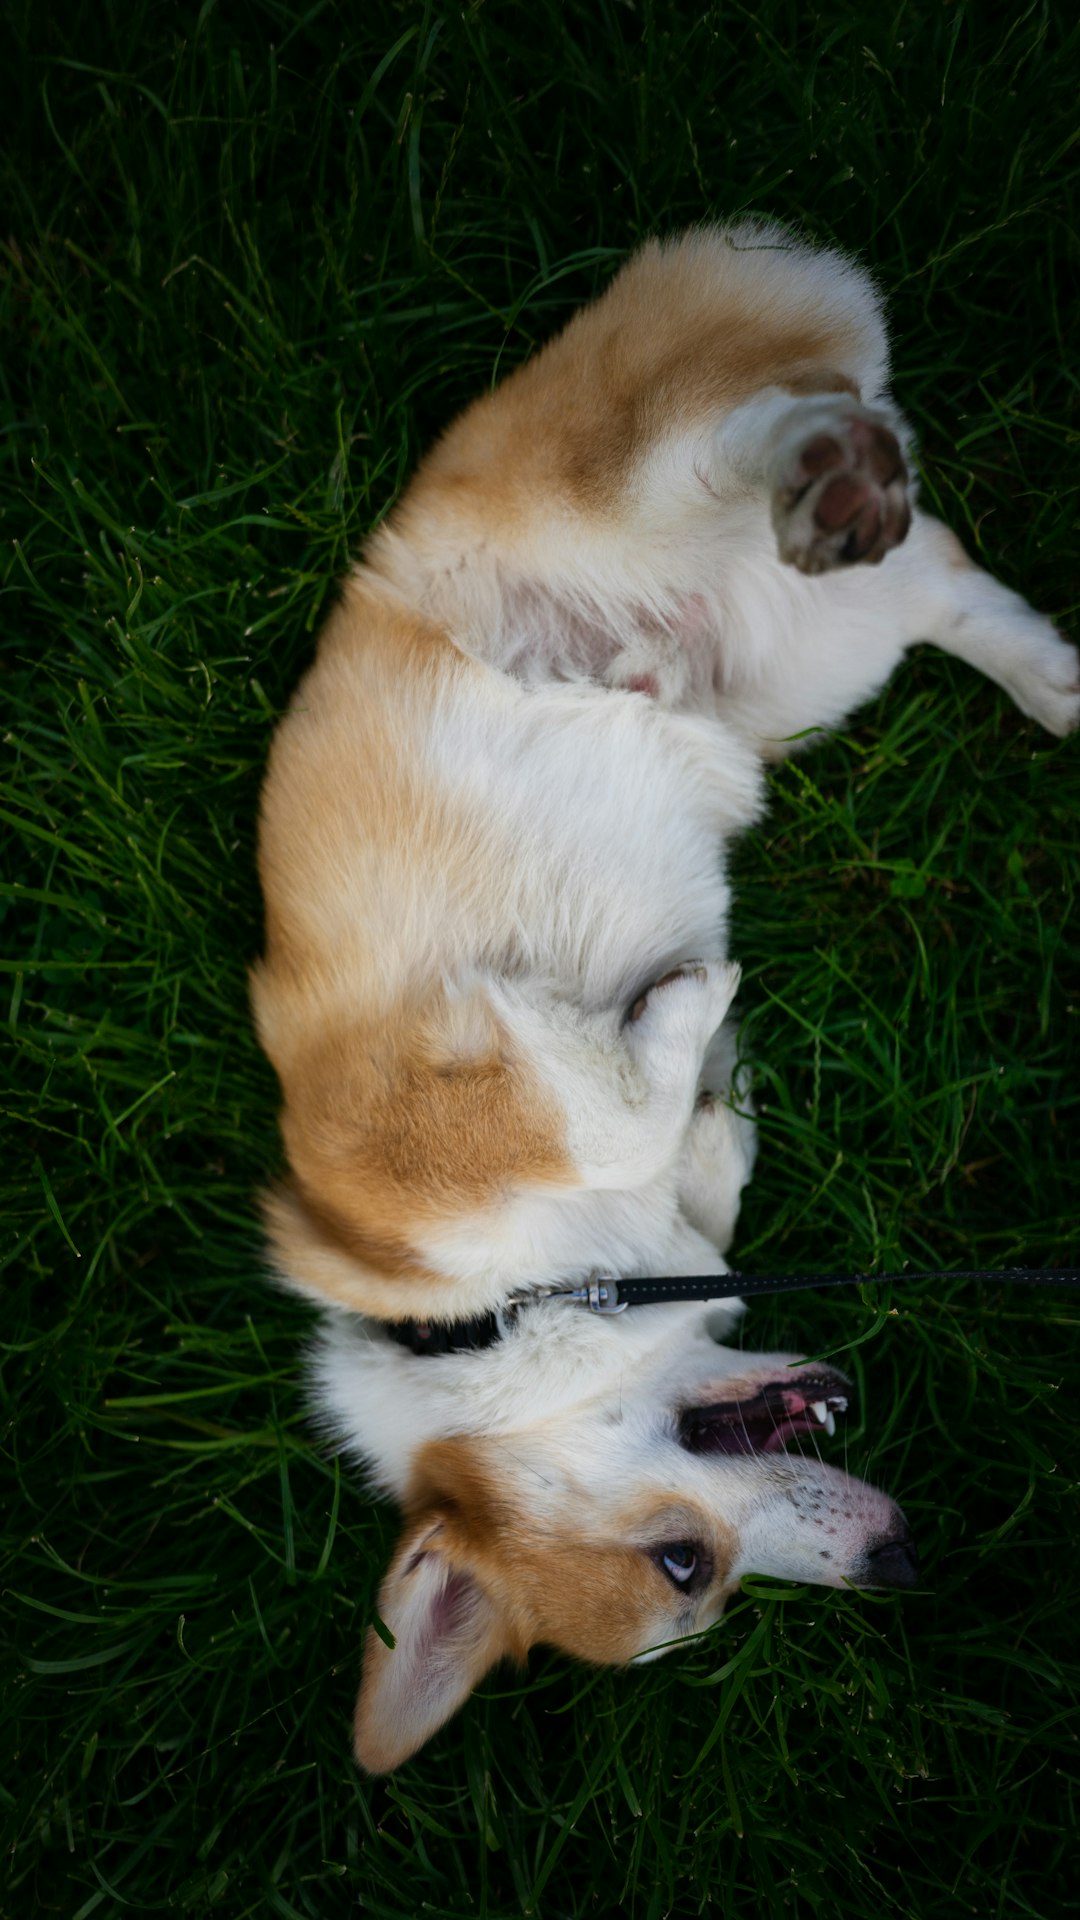 white and brown short coated dog lying on green grass